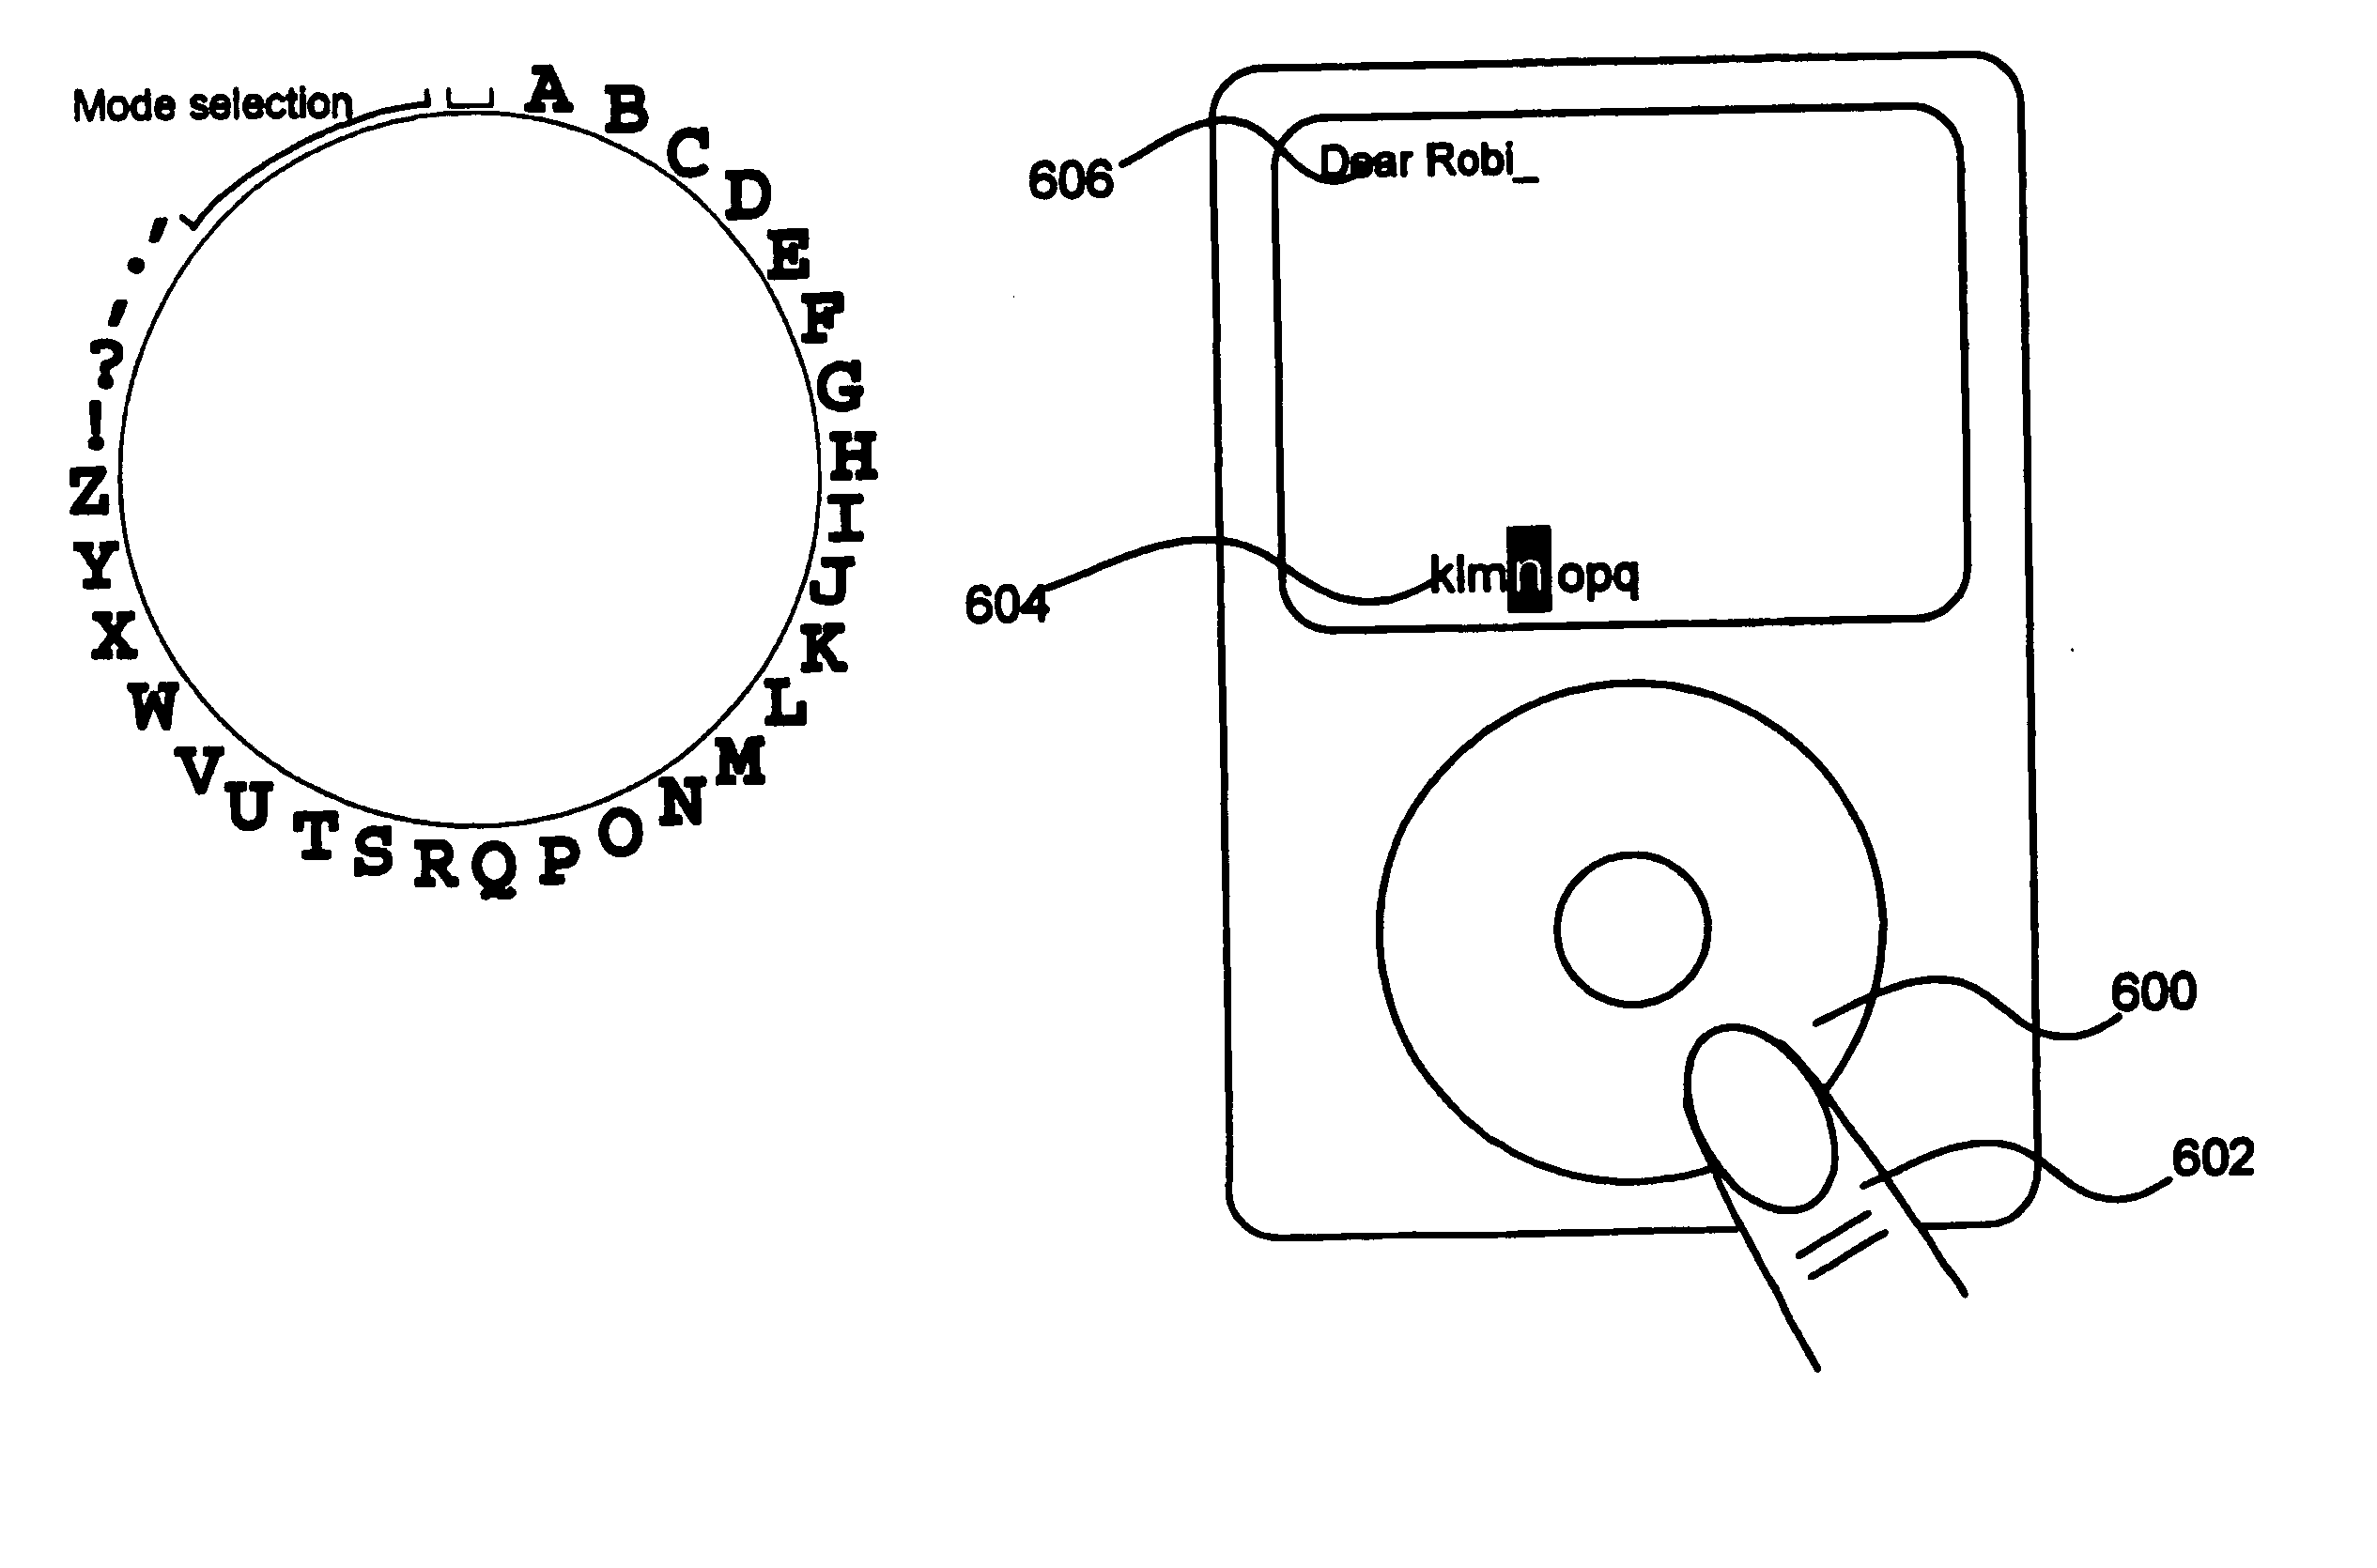 Mobile communication terminal, system and method